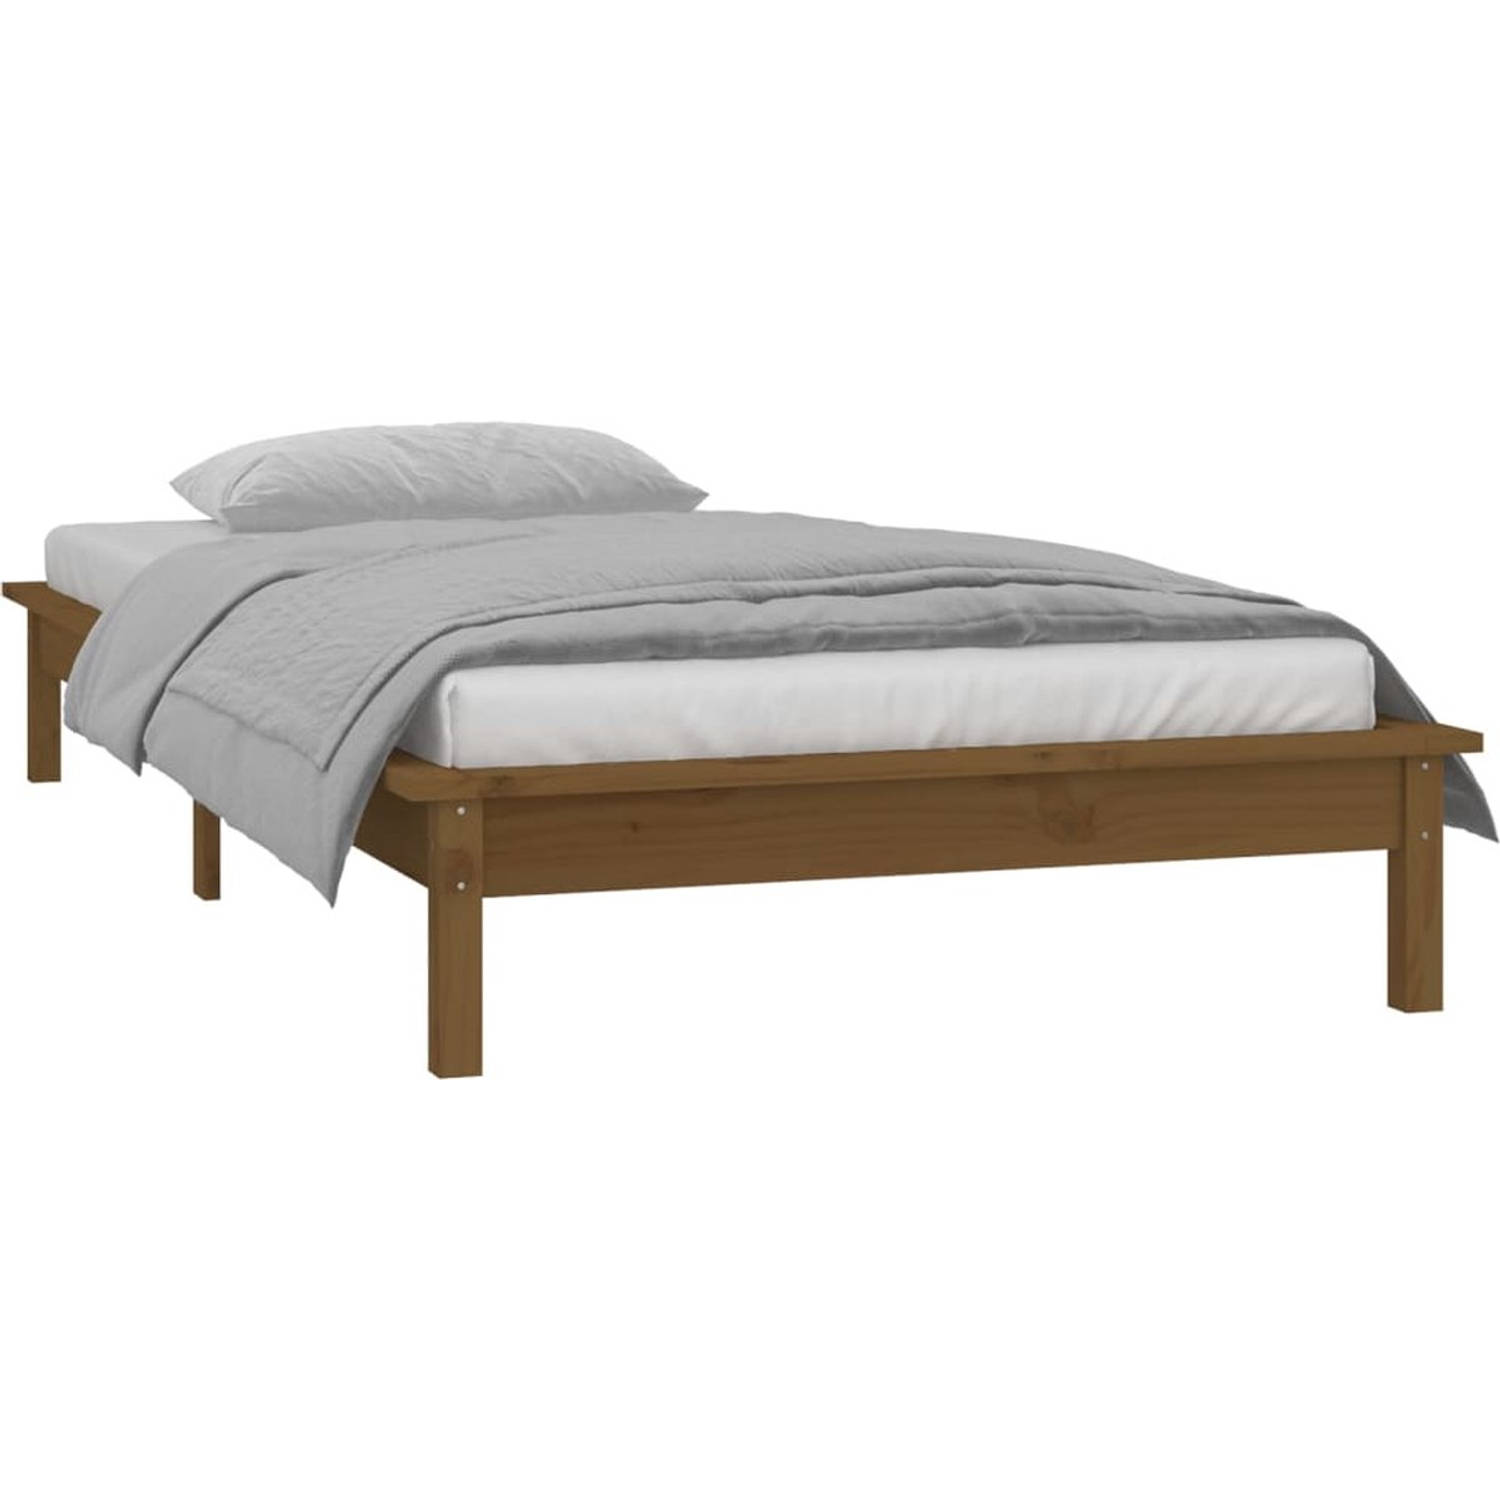 The Living Store Houten Bedframe - LED-verlichting - 202 x 86.5 x 26 cm - Massief grenenhout